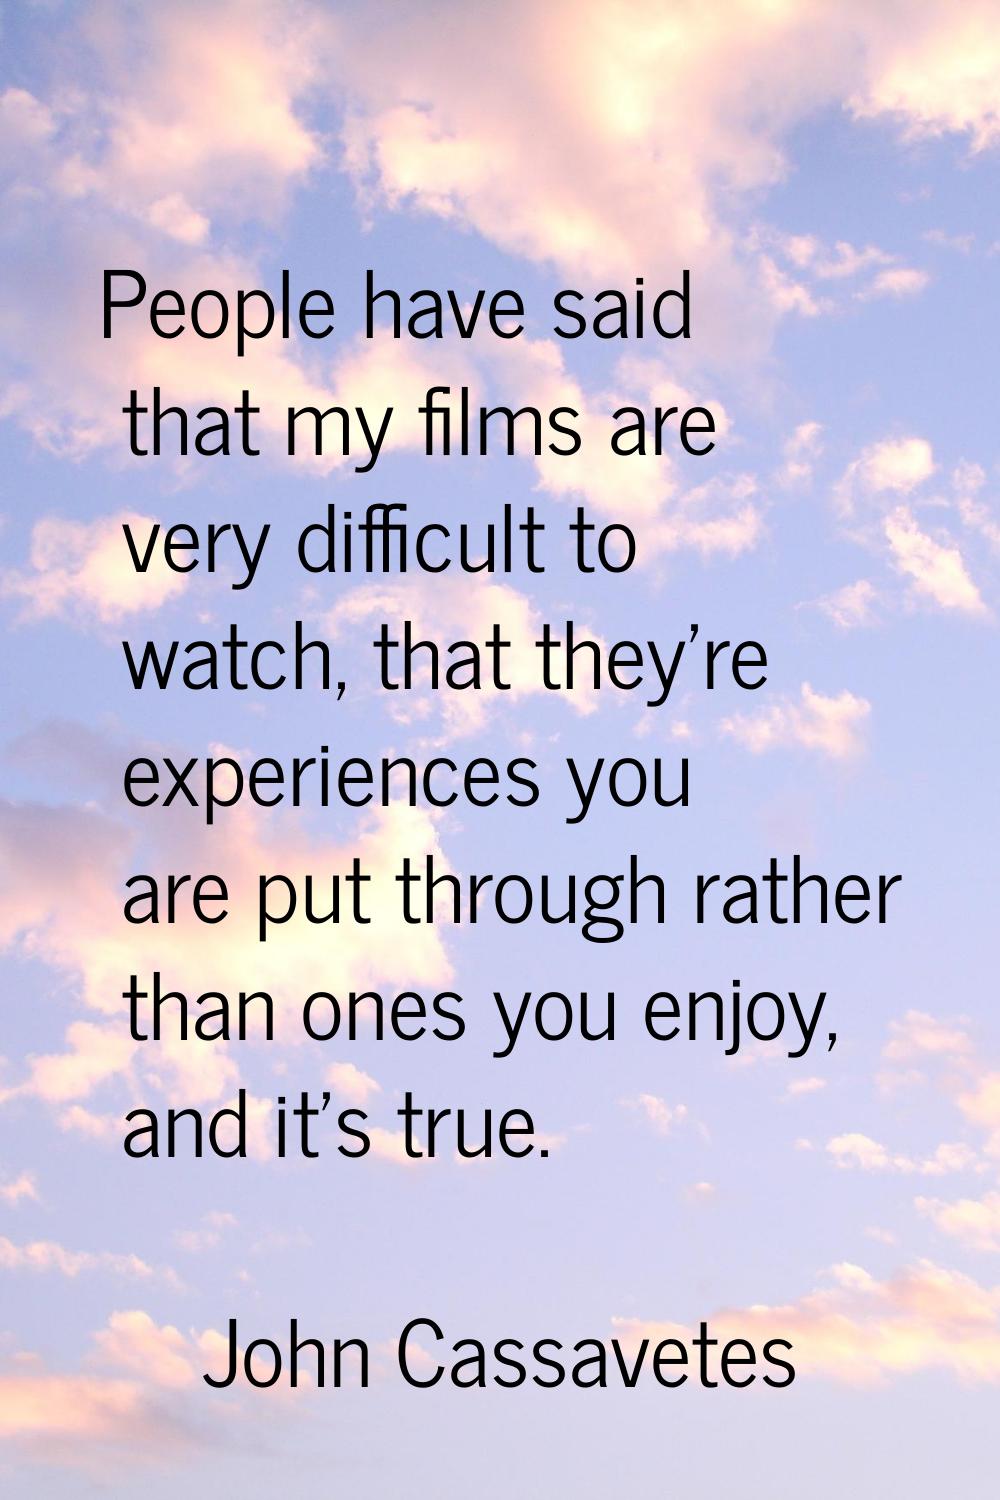 People have said that my films are very difficult to watch, that they're experiences you are put th